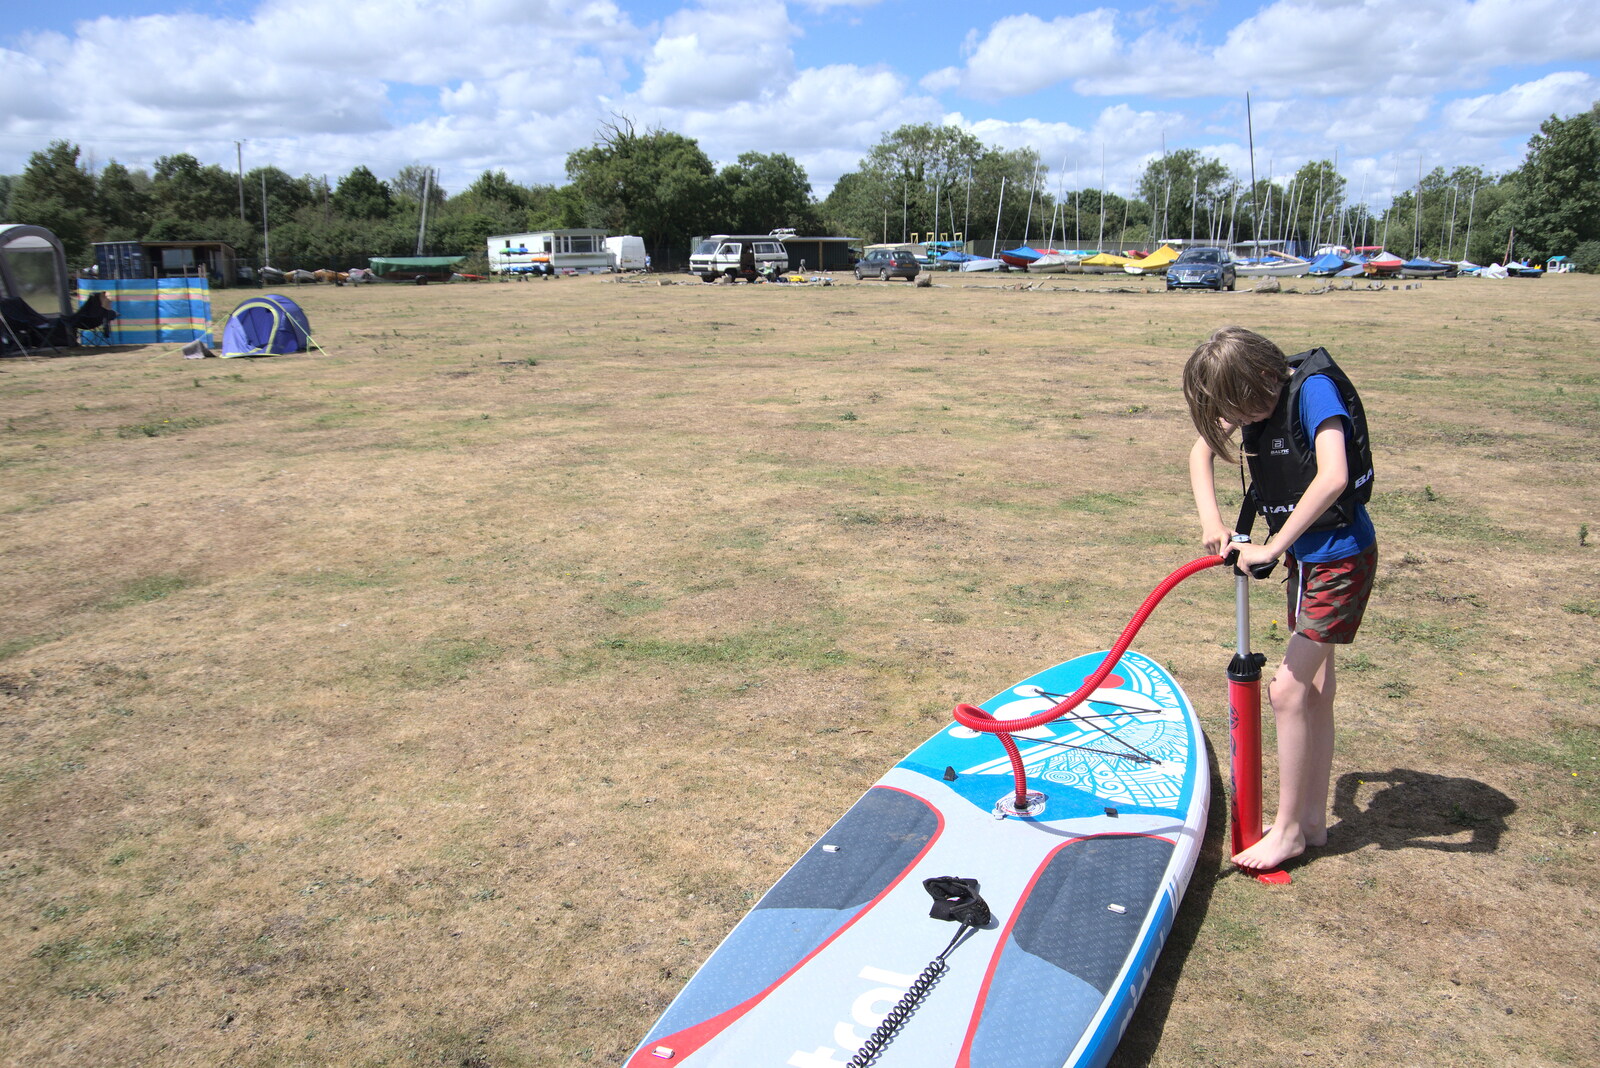 Harry pumps up another paddle board from Camping at the Lake, Weybread, Harleston - 25th June 2022